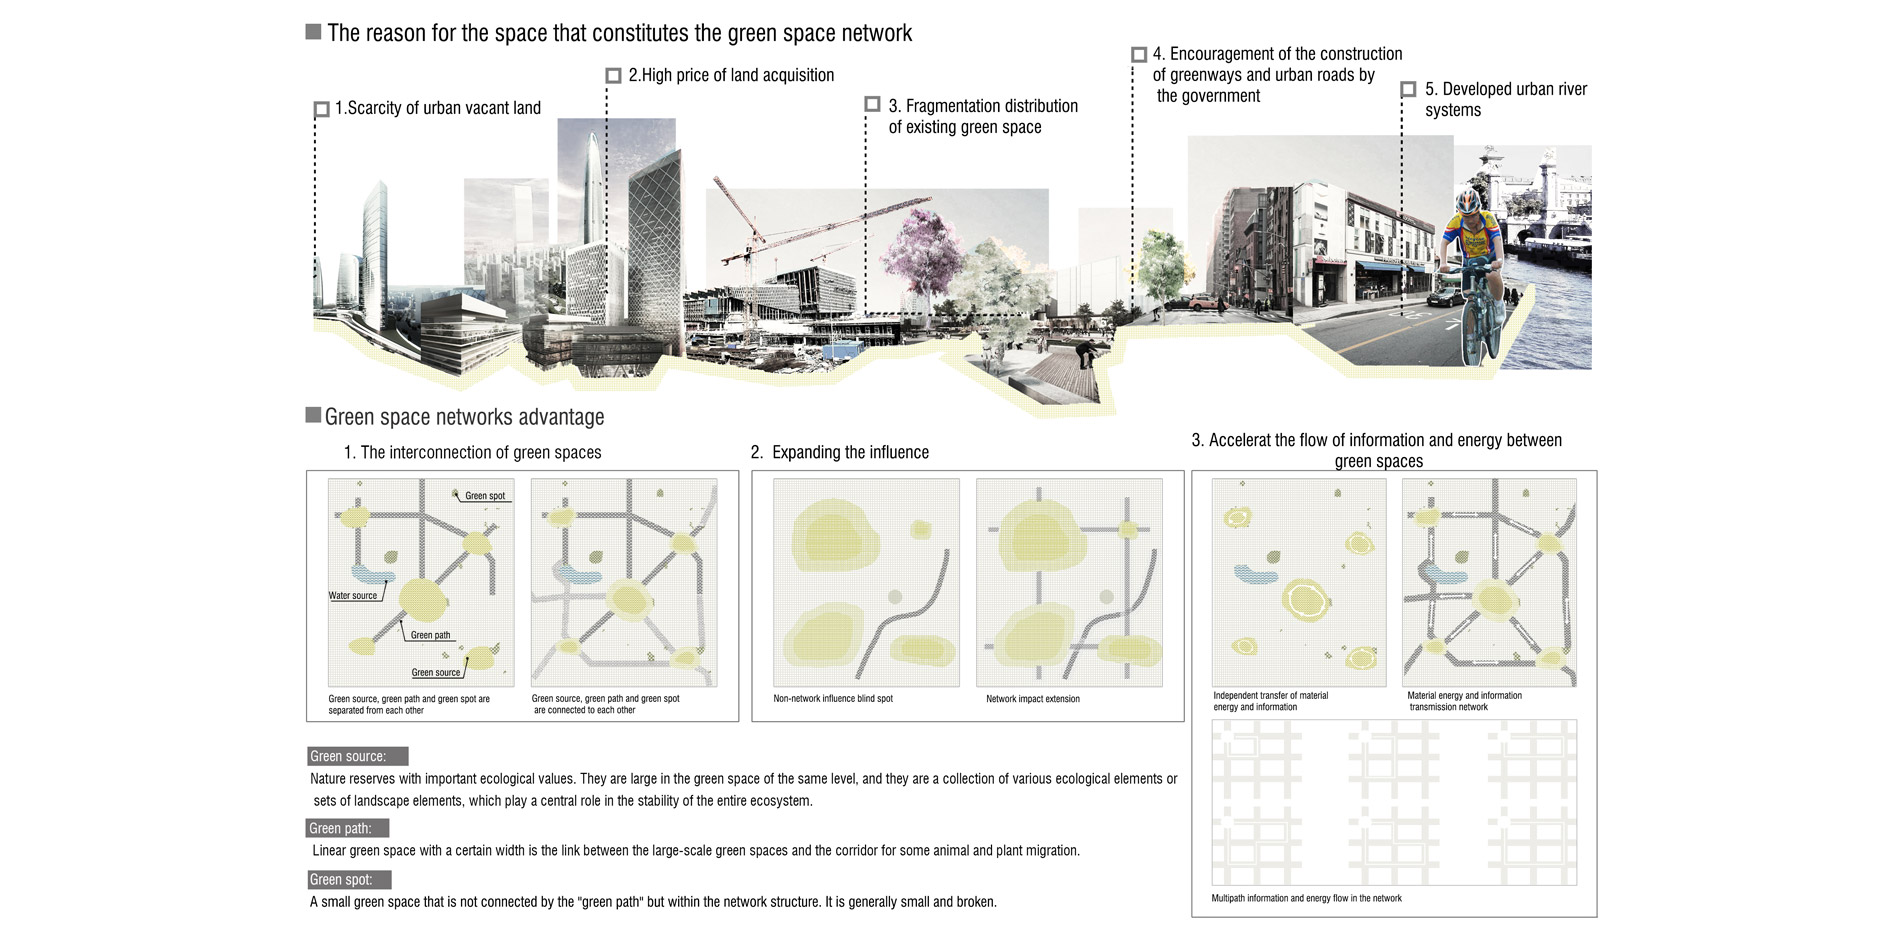 The reasons for planning the urban green space network